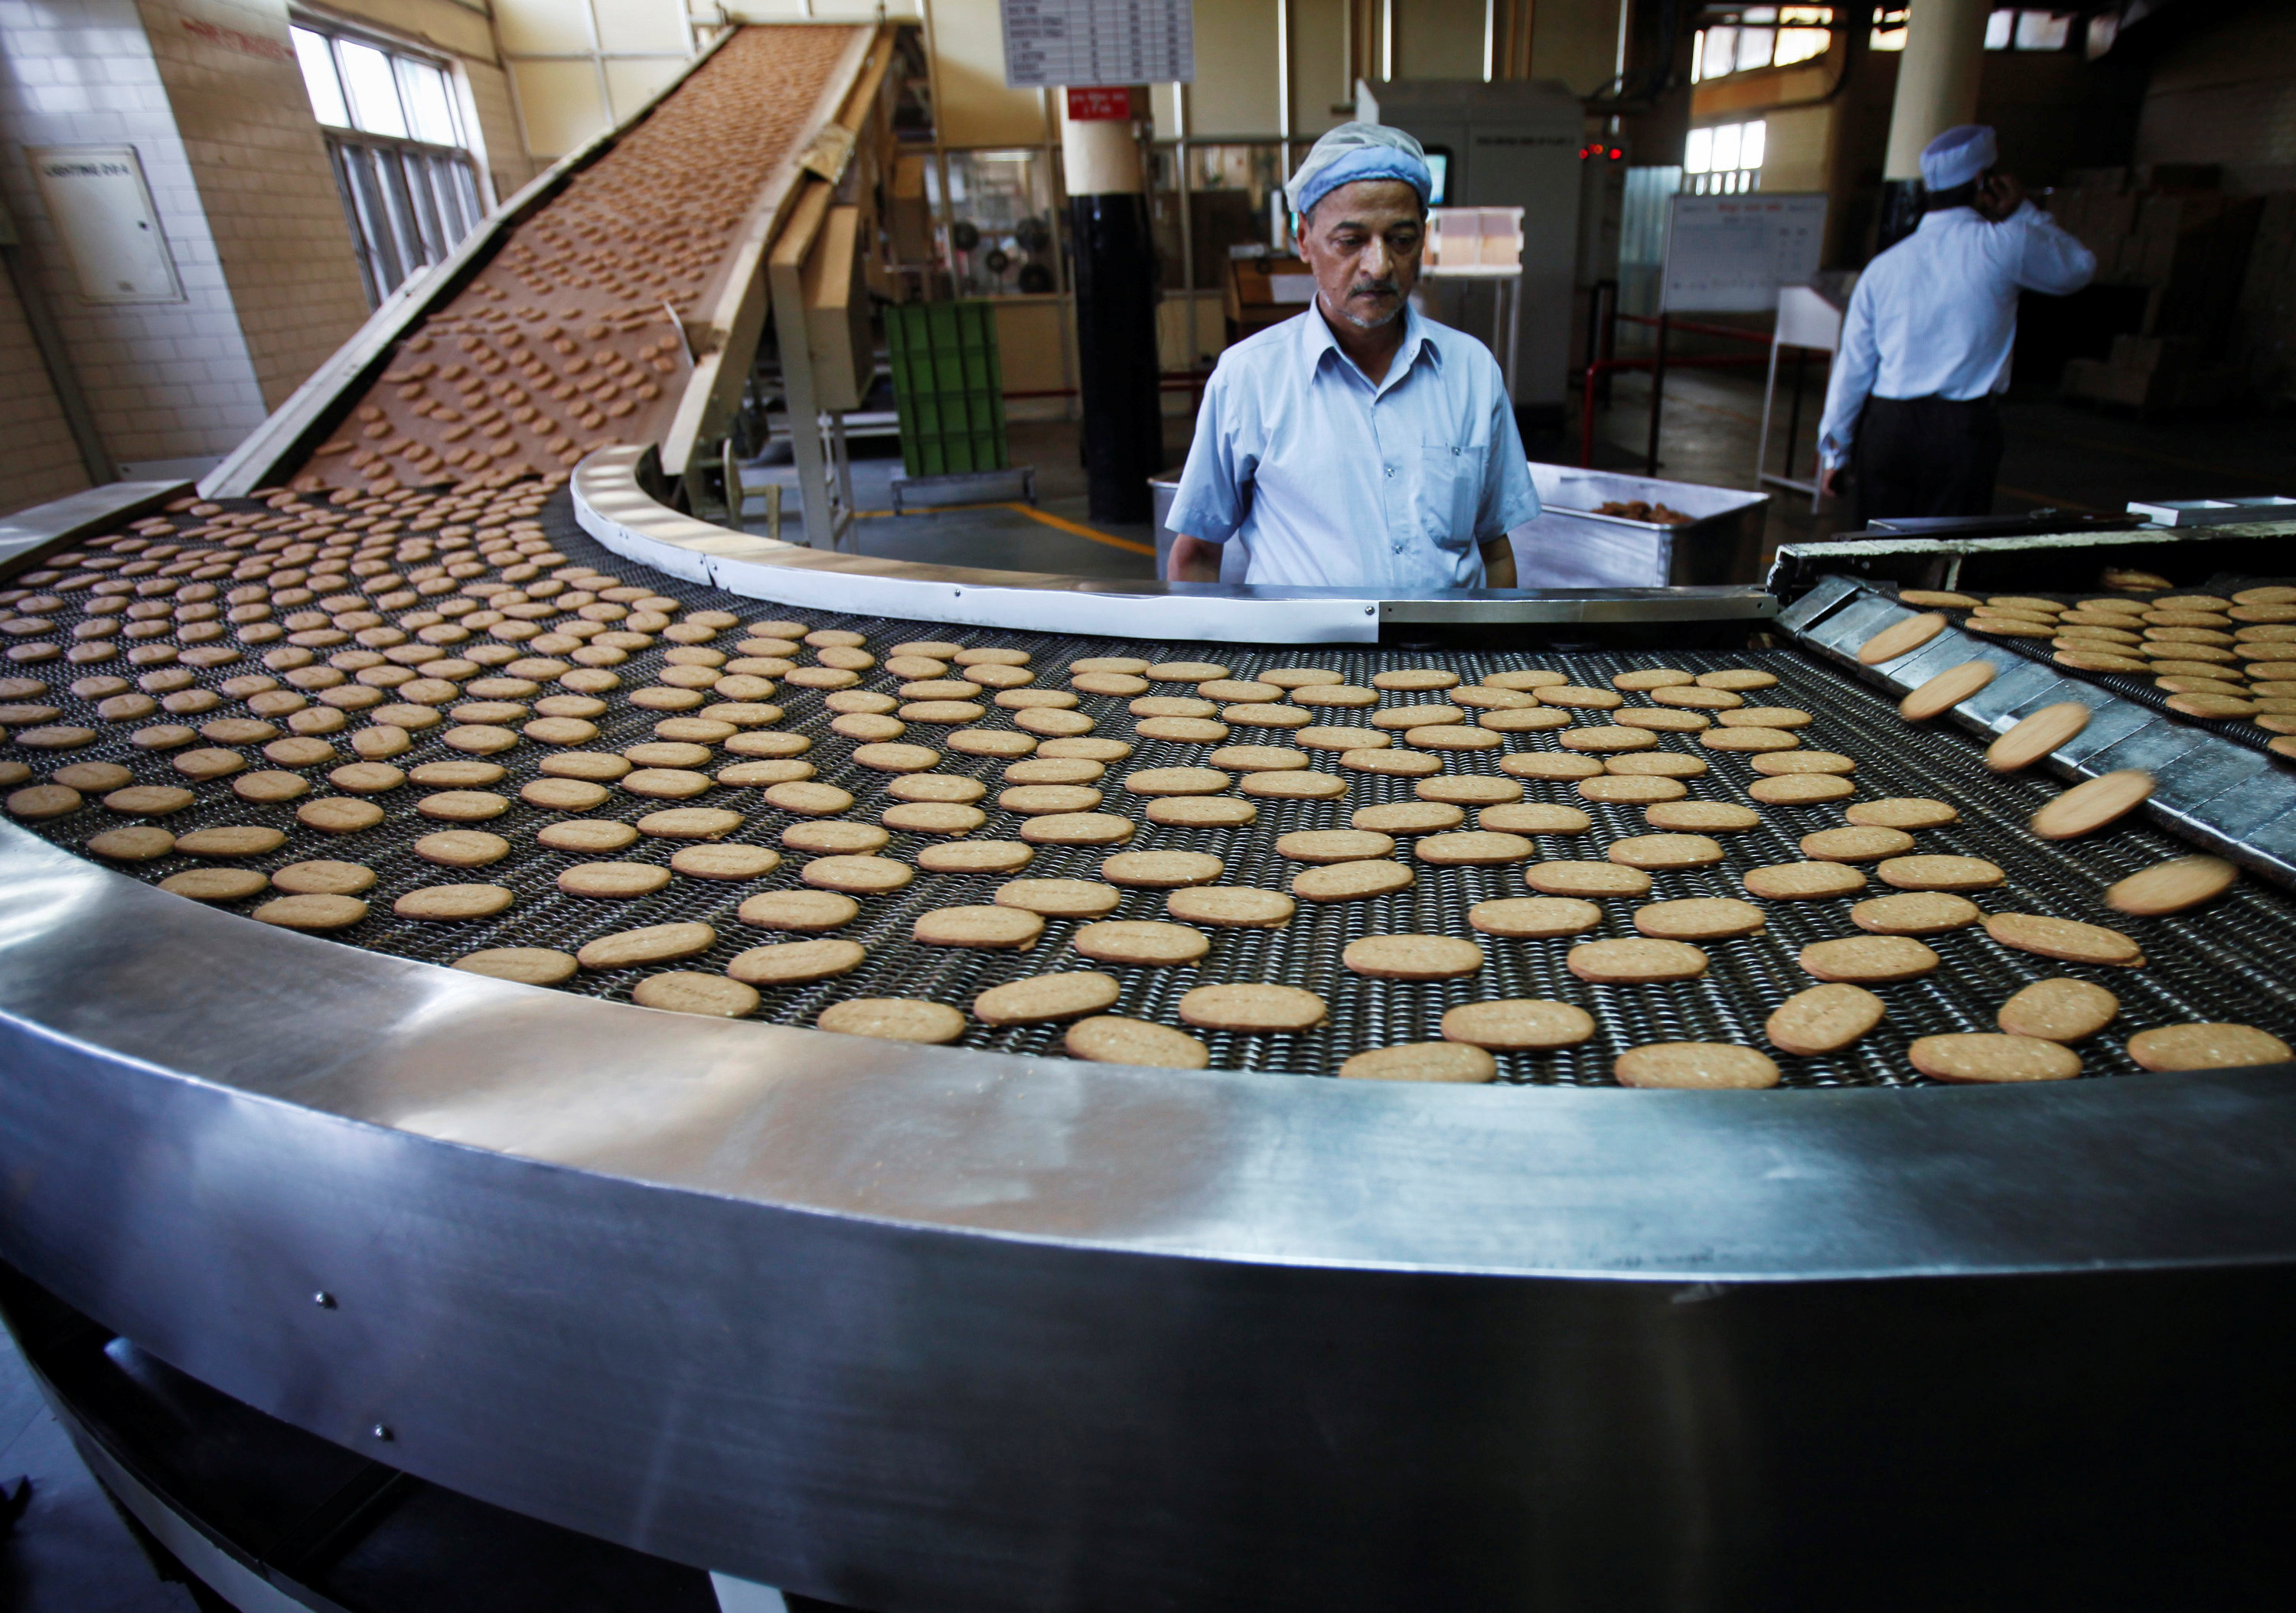 FILE PHOTO A worker stands next to a production line at the Britannia biscuit factory in New Delhi